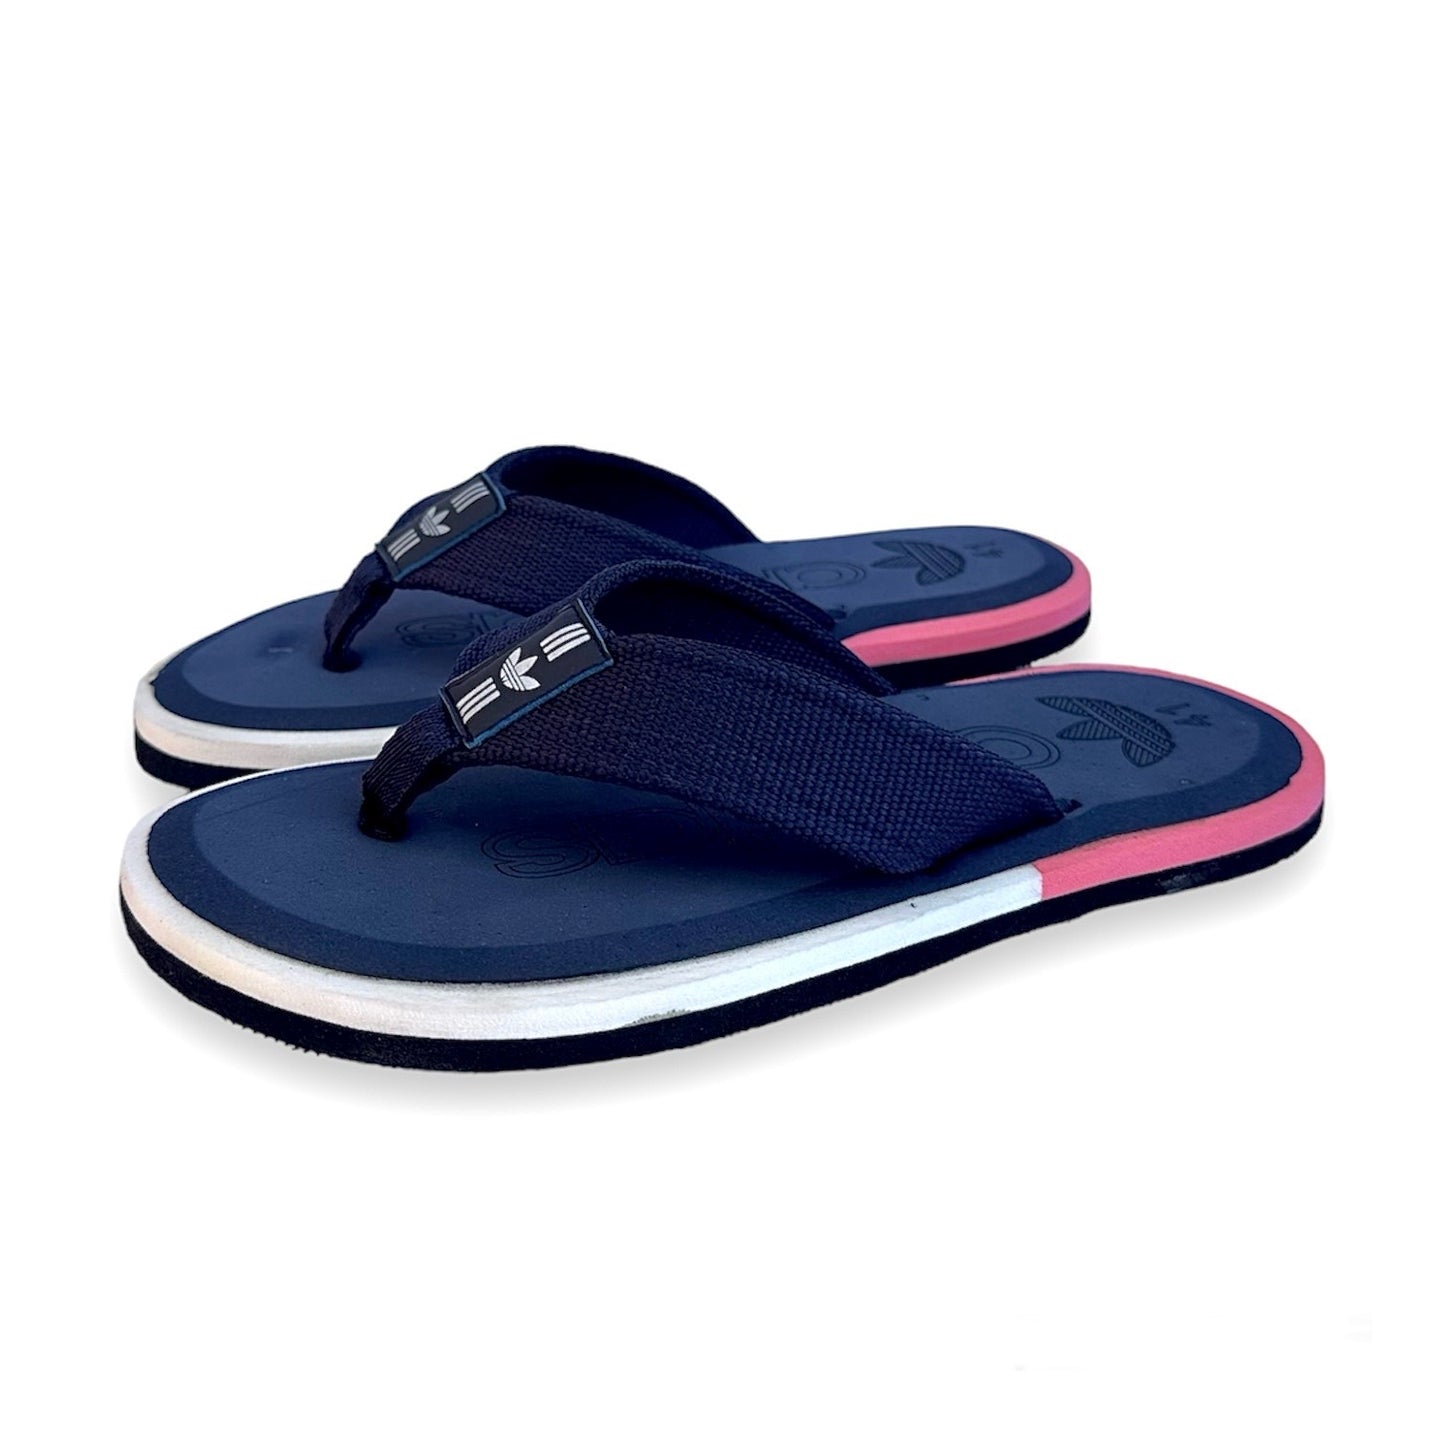 A-d-i-d-a-s slippers in blue